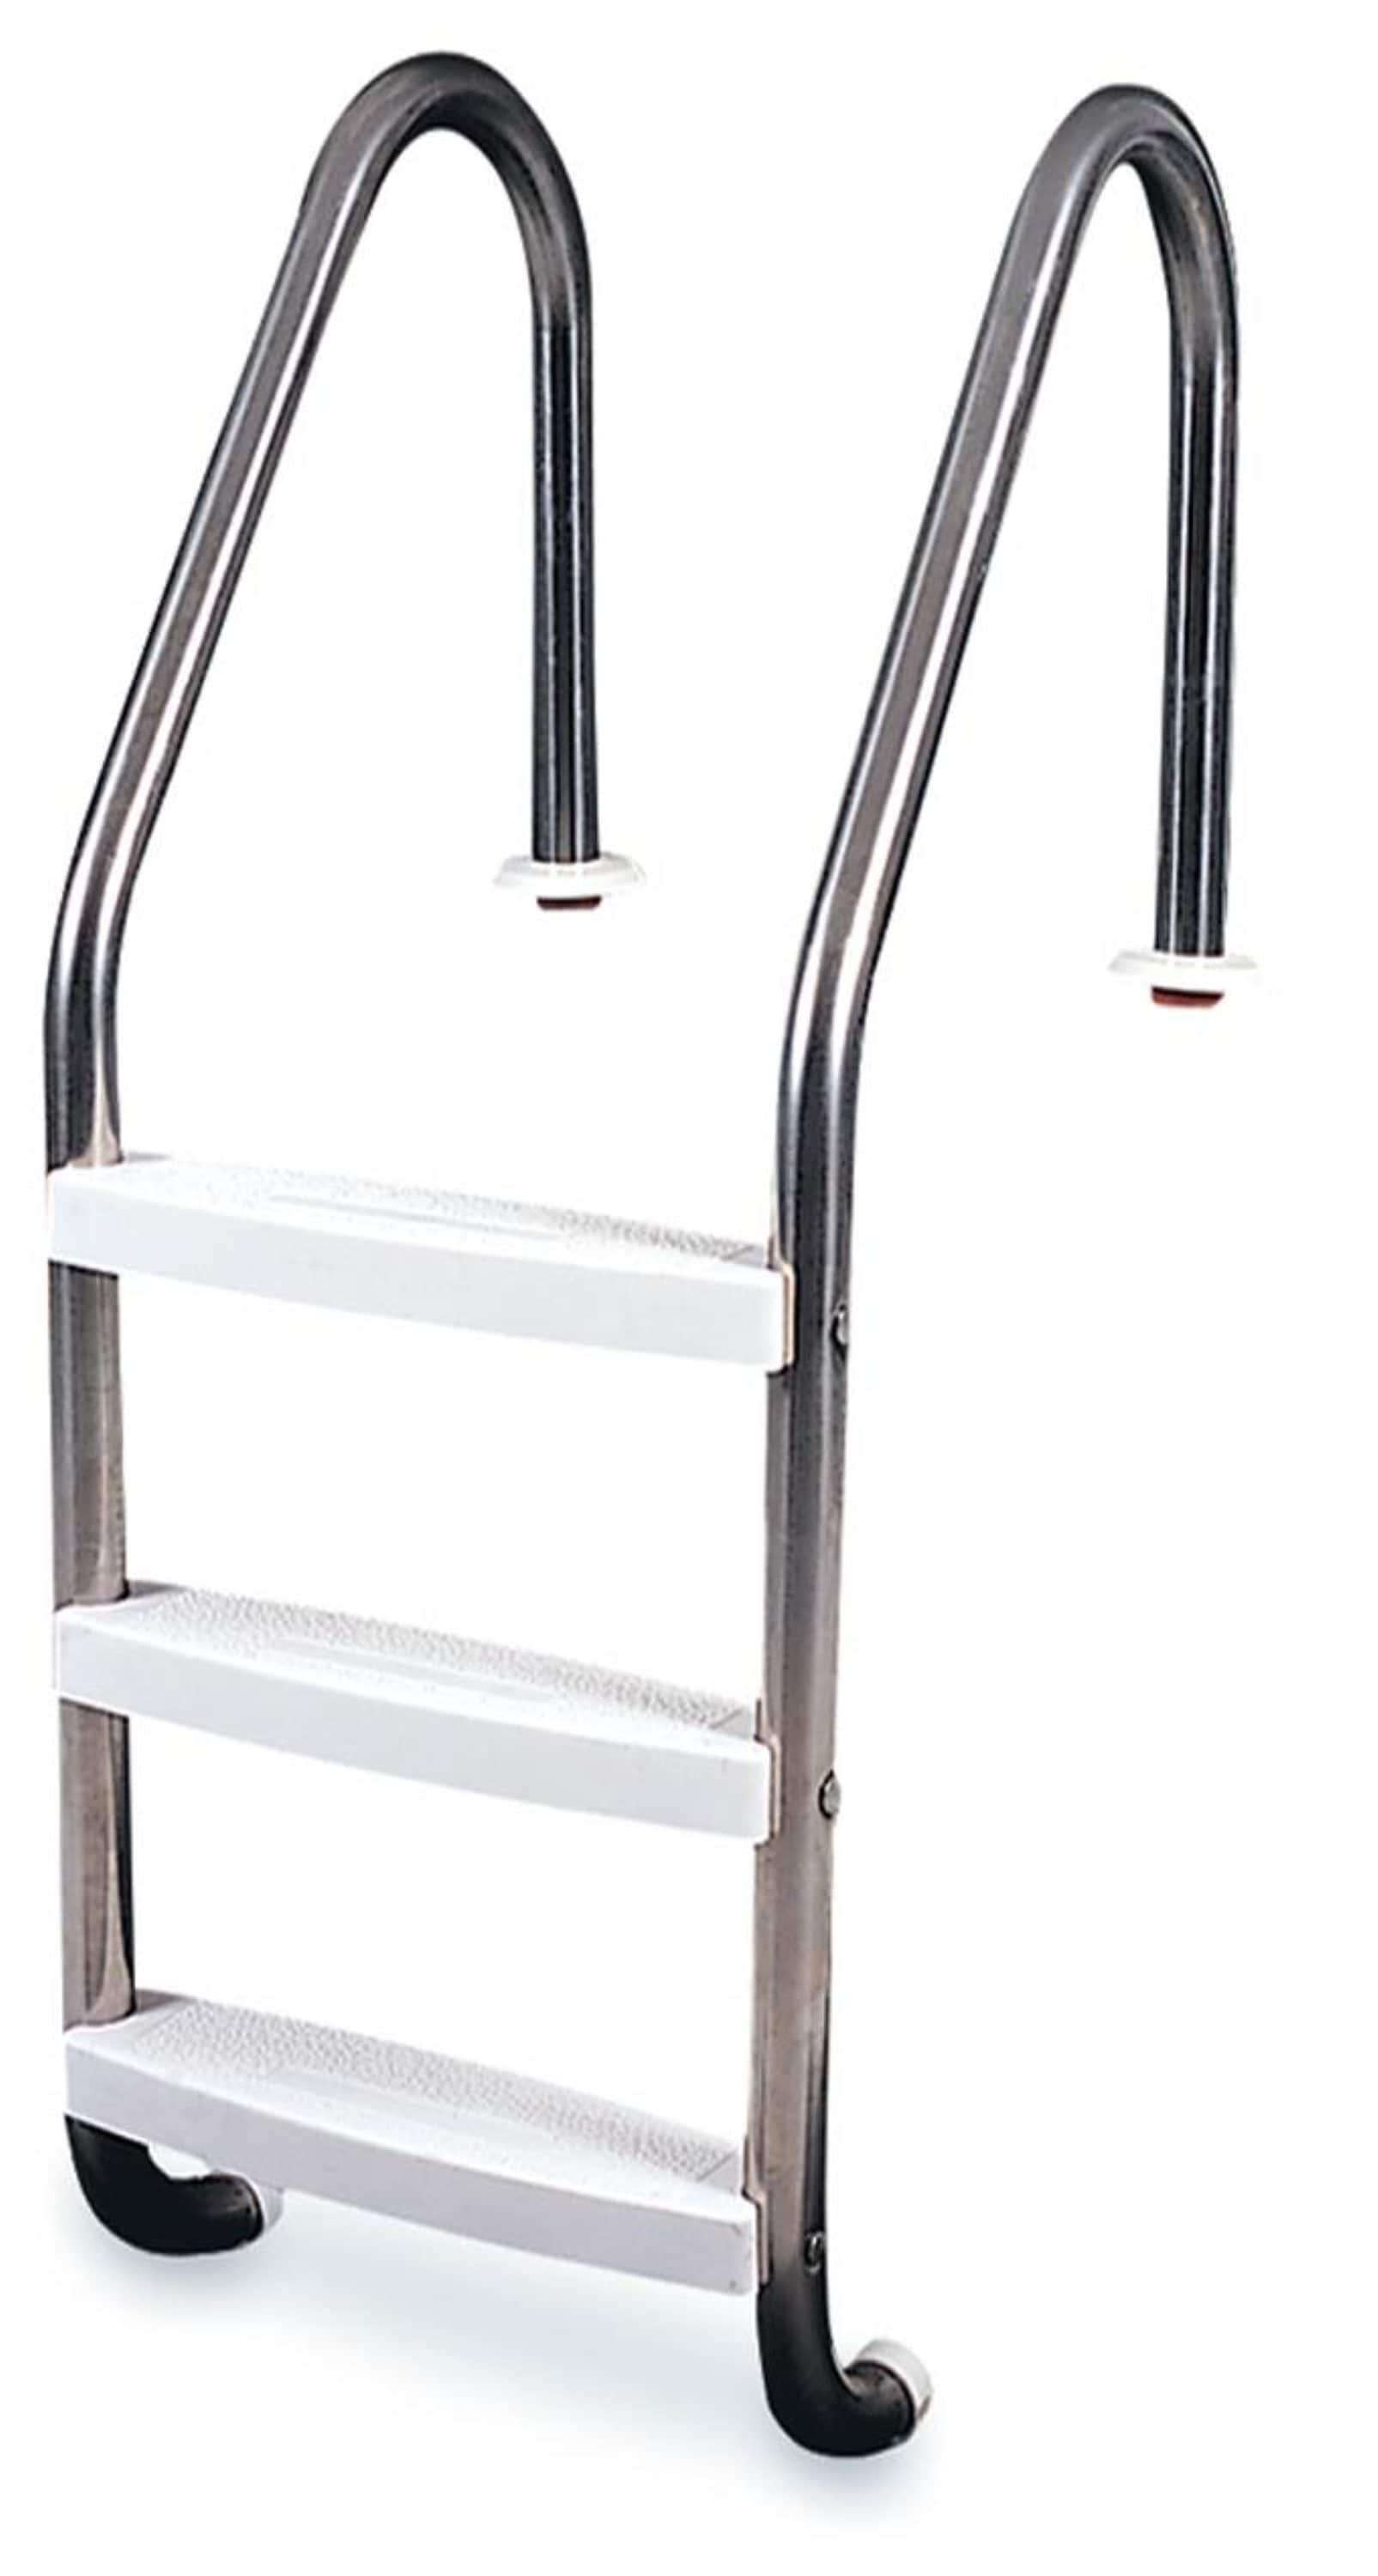 3 Hydrotools 87906 Swimming Pool Stainless Steel  Ladder Rung Steps 